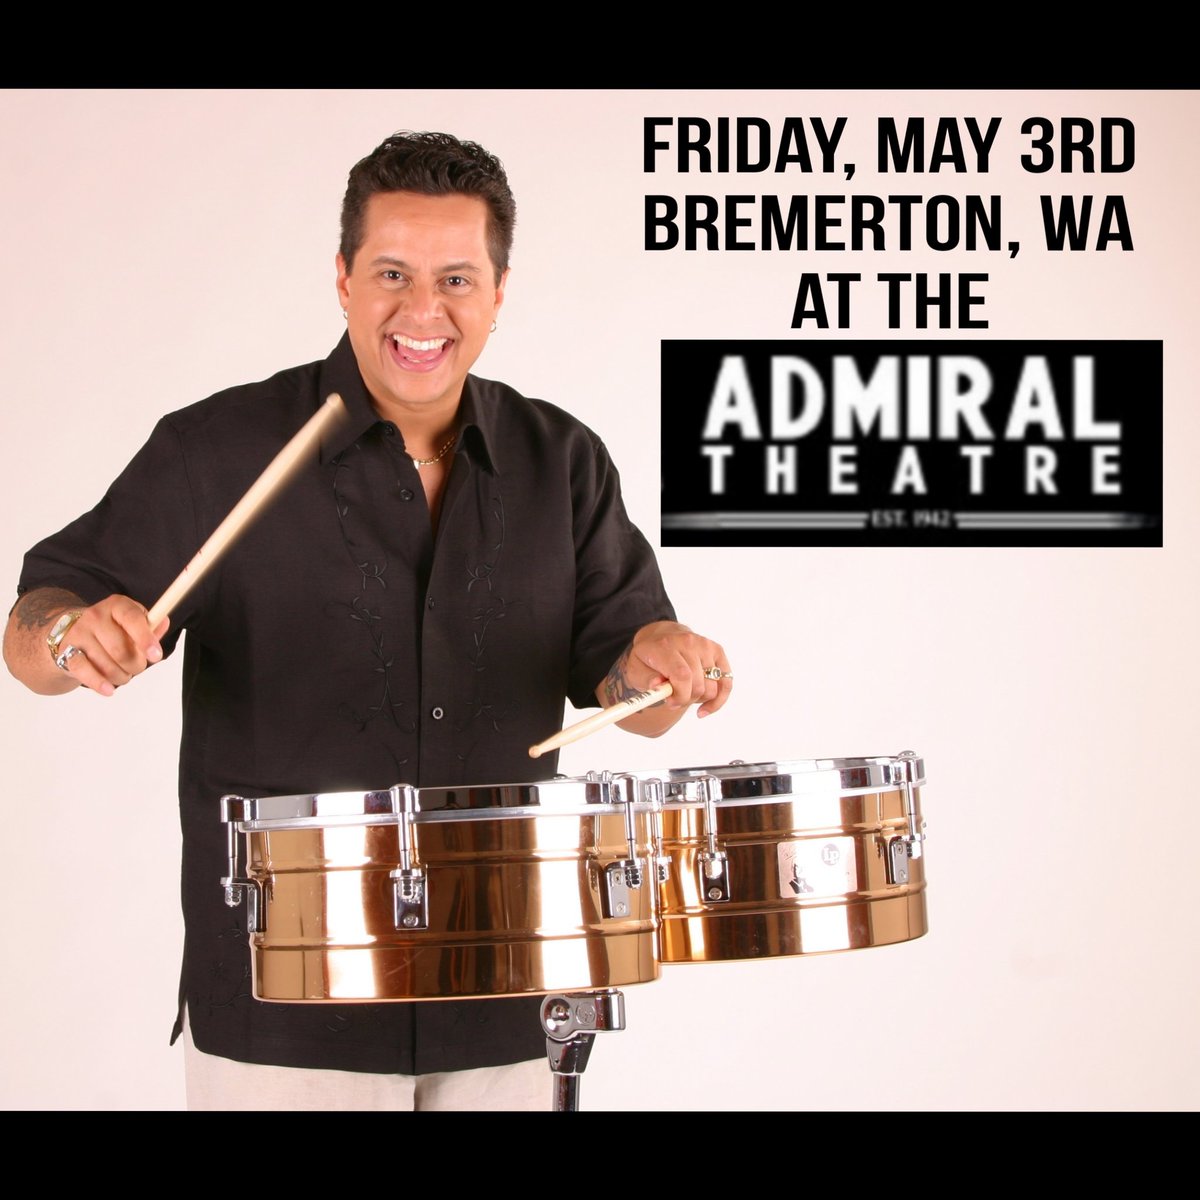 Seattle, Tacoma, Bremerton, WA come mambo with Tito Puente,Jr.  and his latin jazz orchestra live in concert Friday May 3rd at the Admiral Theatre 515 Pacific Avenue, Bremerton, WA, 98337. Doors 6:30 p.m. | Show 8 p.m.
Get tickets at: Admiraltheatre.org
@admiral_theatre